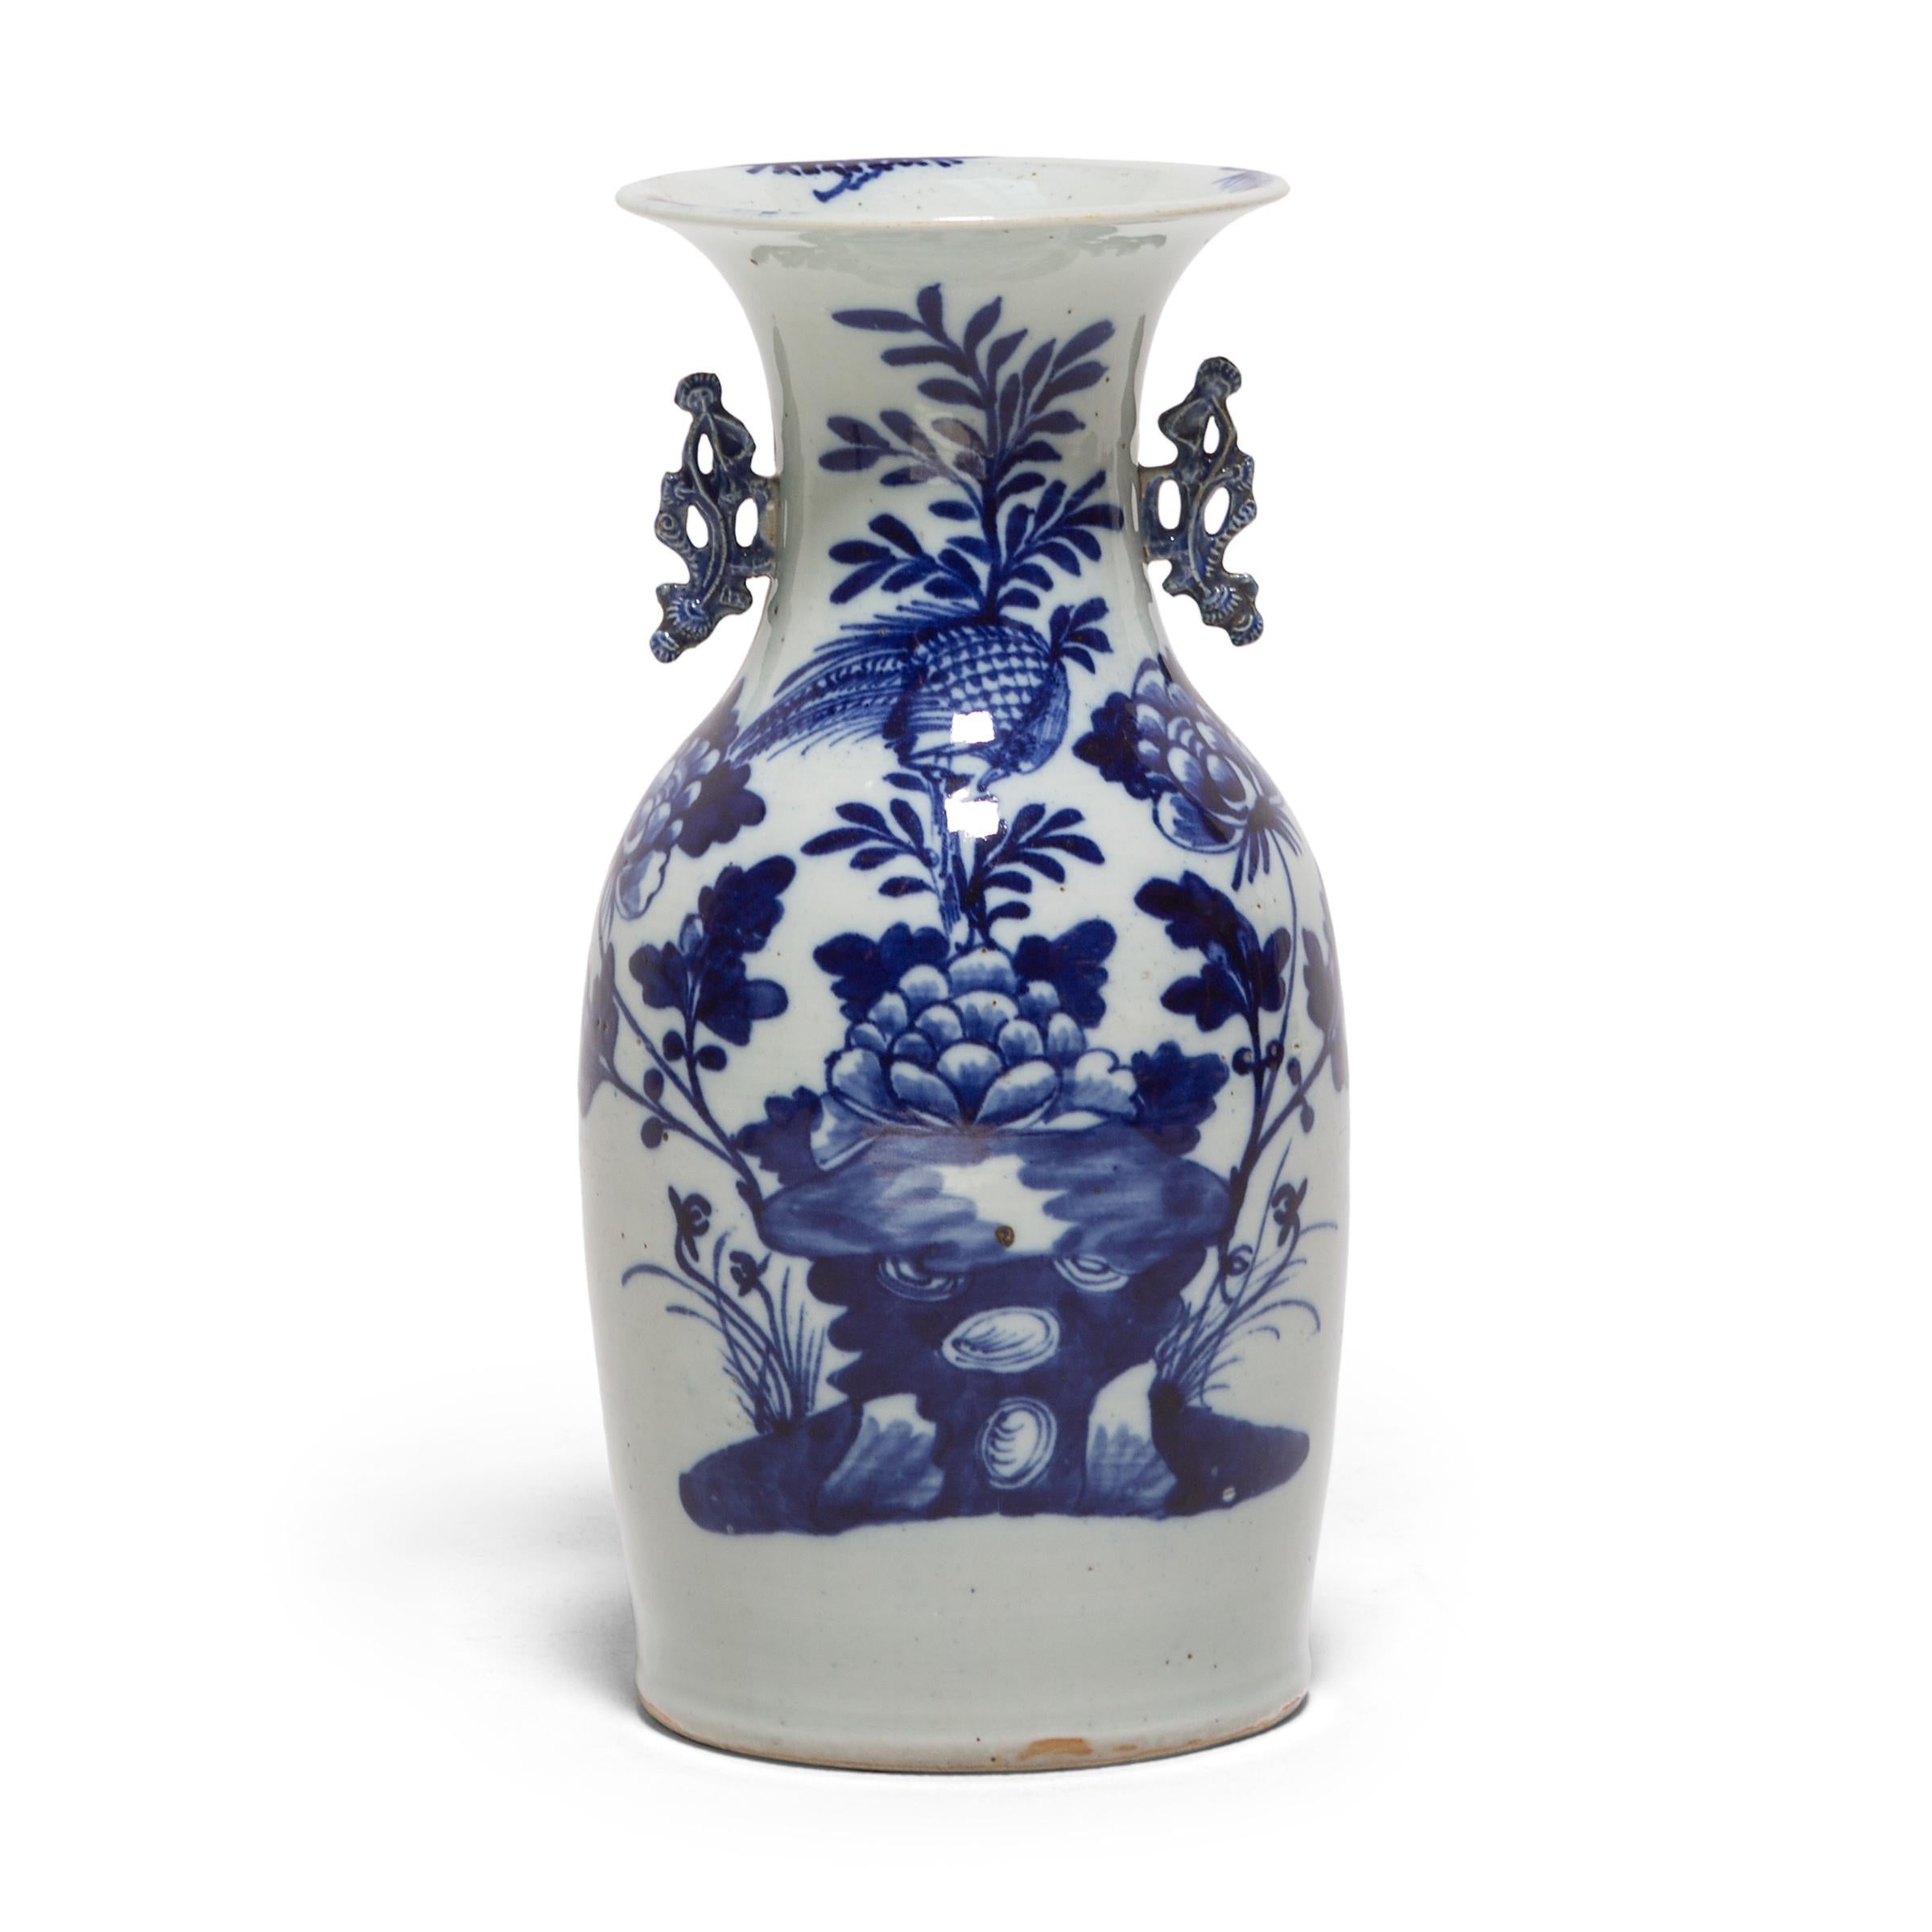 This pair of 19th-century porcelain vases is an exquisite example of blue-and-white pottery. Each vase is expertly formed with thin walls, gently widening to a flared lip, flanked by two molded scroll handles. Painted with richly saturated cobalt